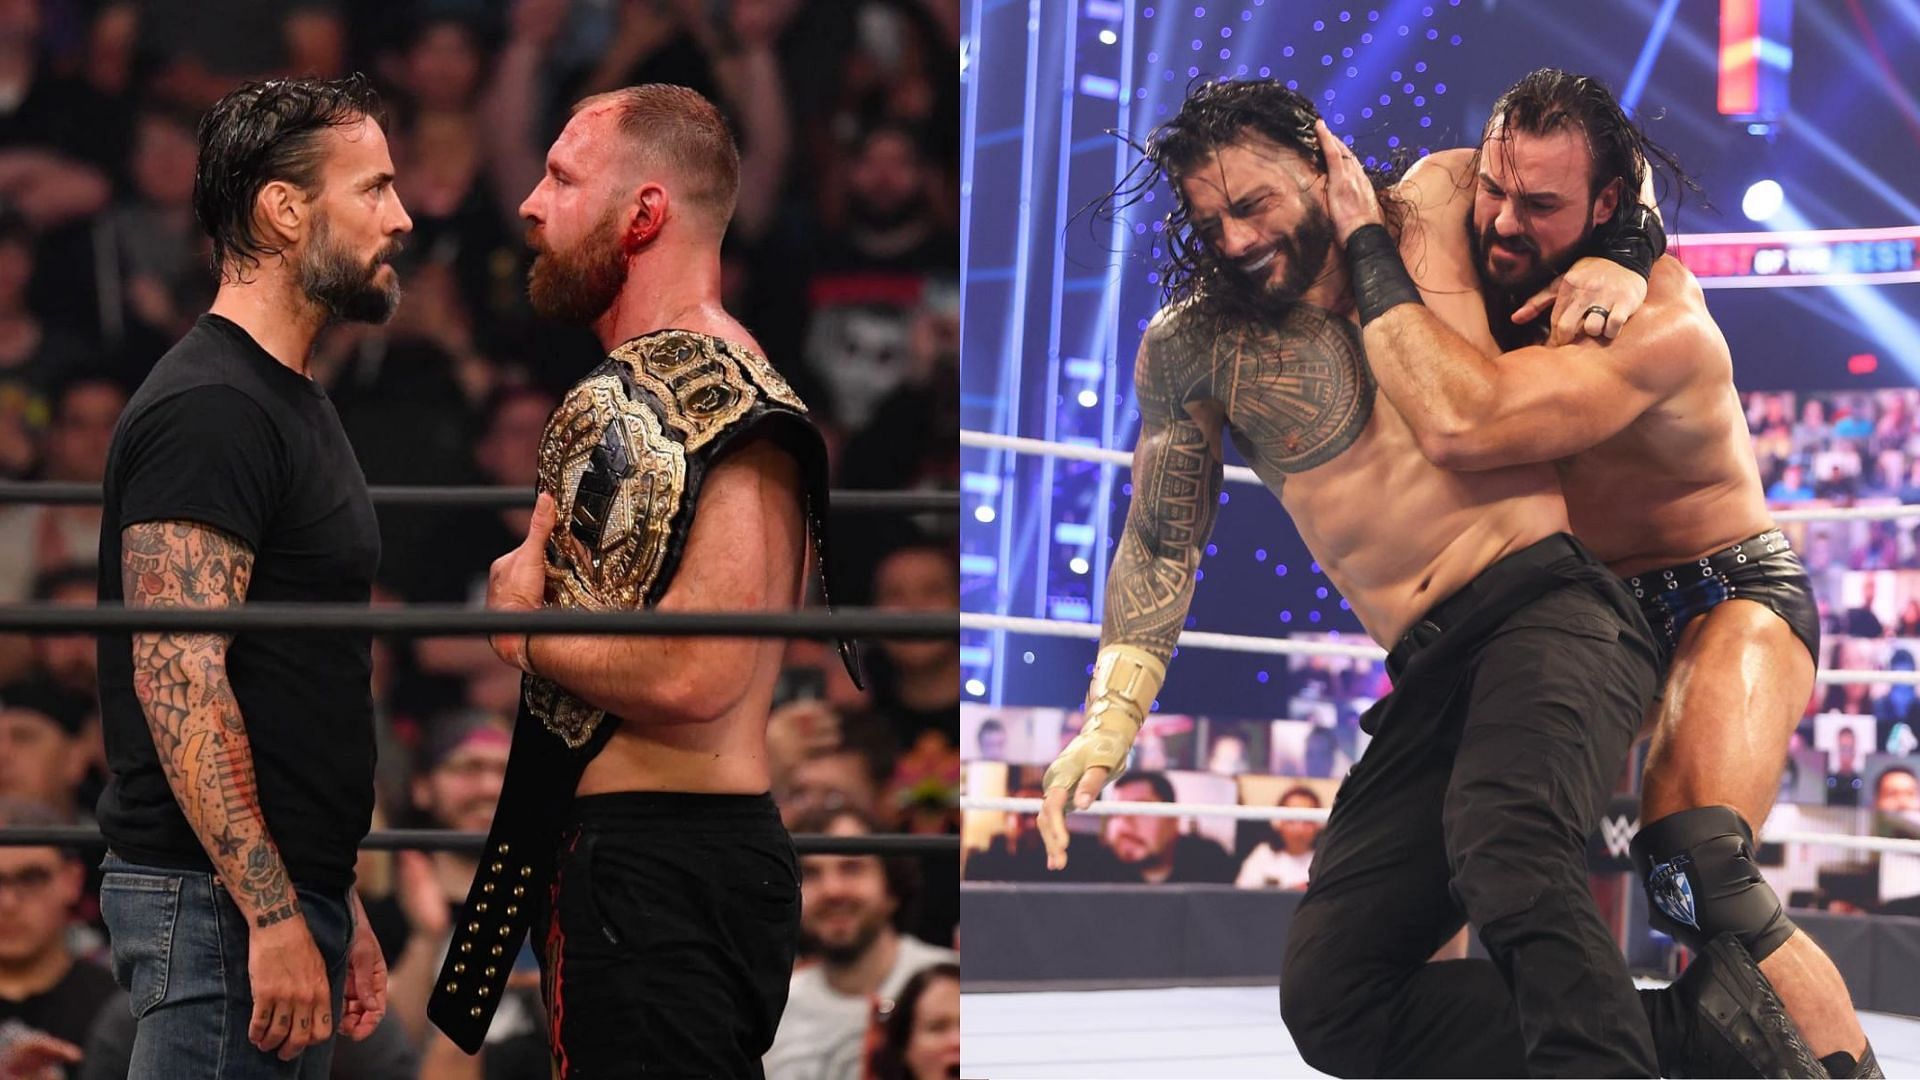 Which main event match is the bigger draw?